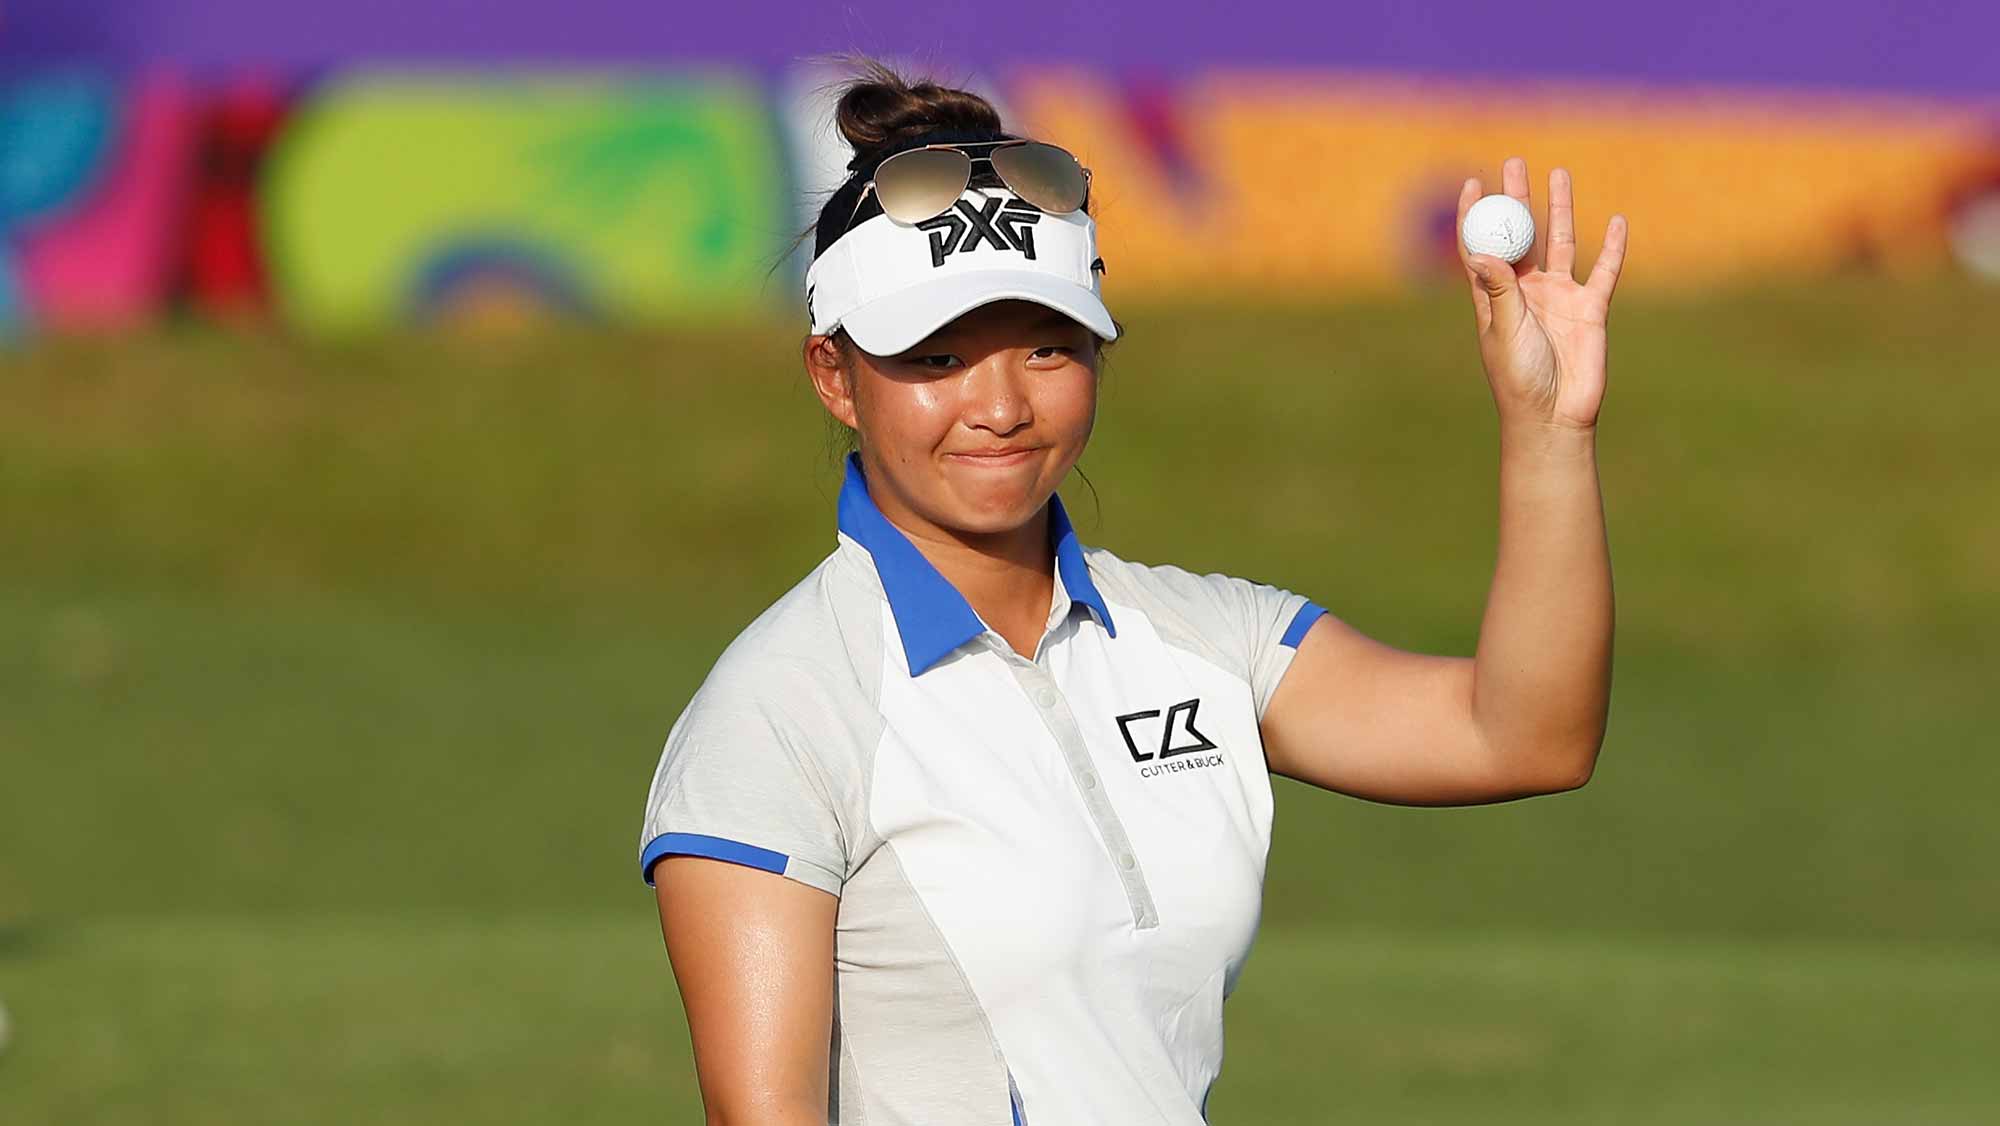 Megan Khang of United States acknowledges to the spectators at the eighteen hole during the second round of the Swinging Skirts LPGA Taiwan Championship at Ta Shee Golf & Country Club on October 26, 2018 in Taoyuan, Chinese Taipei